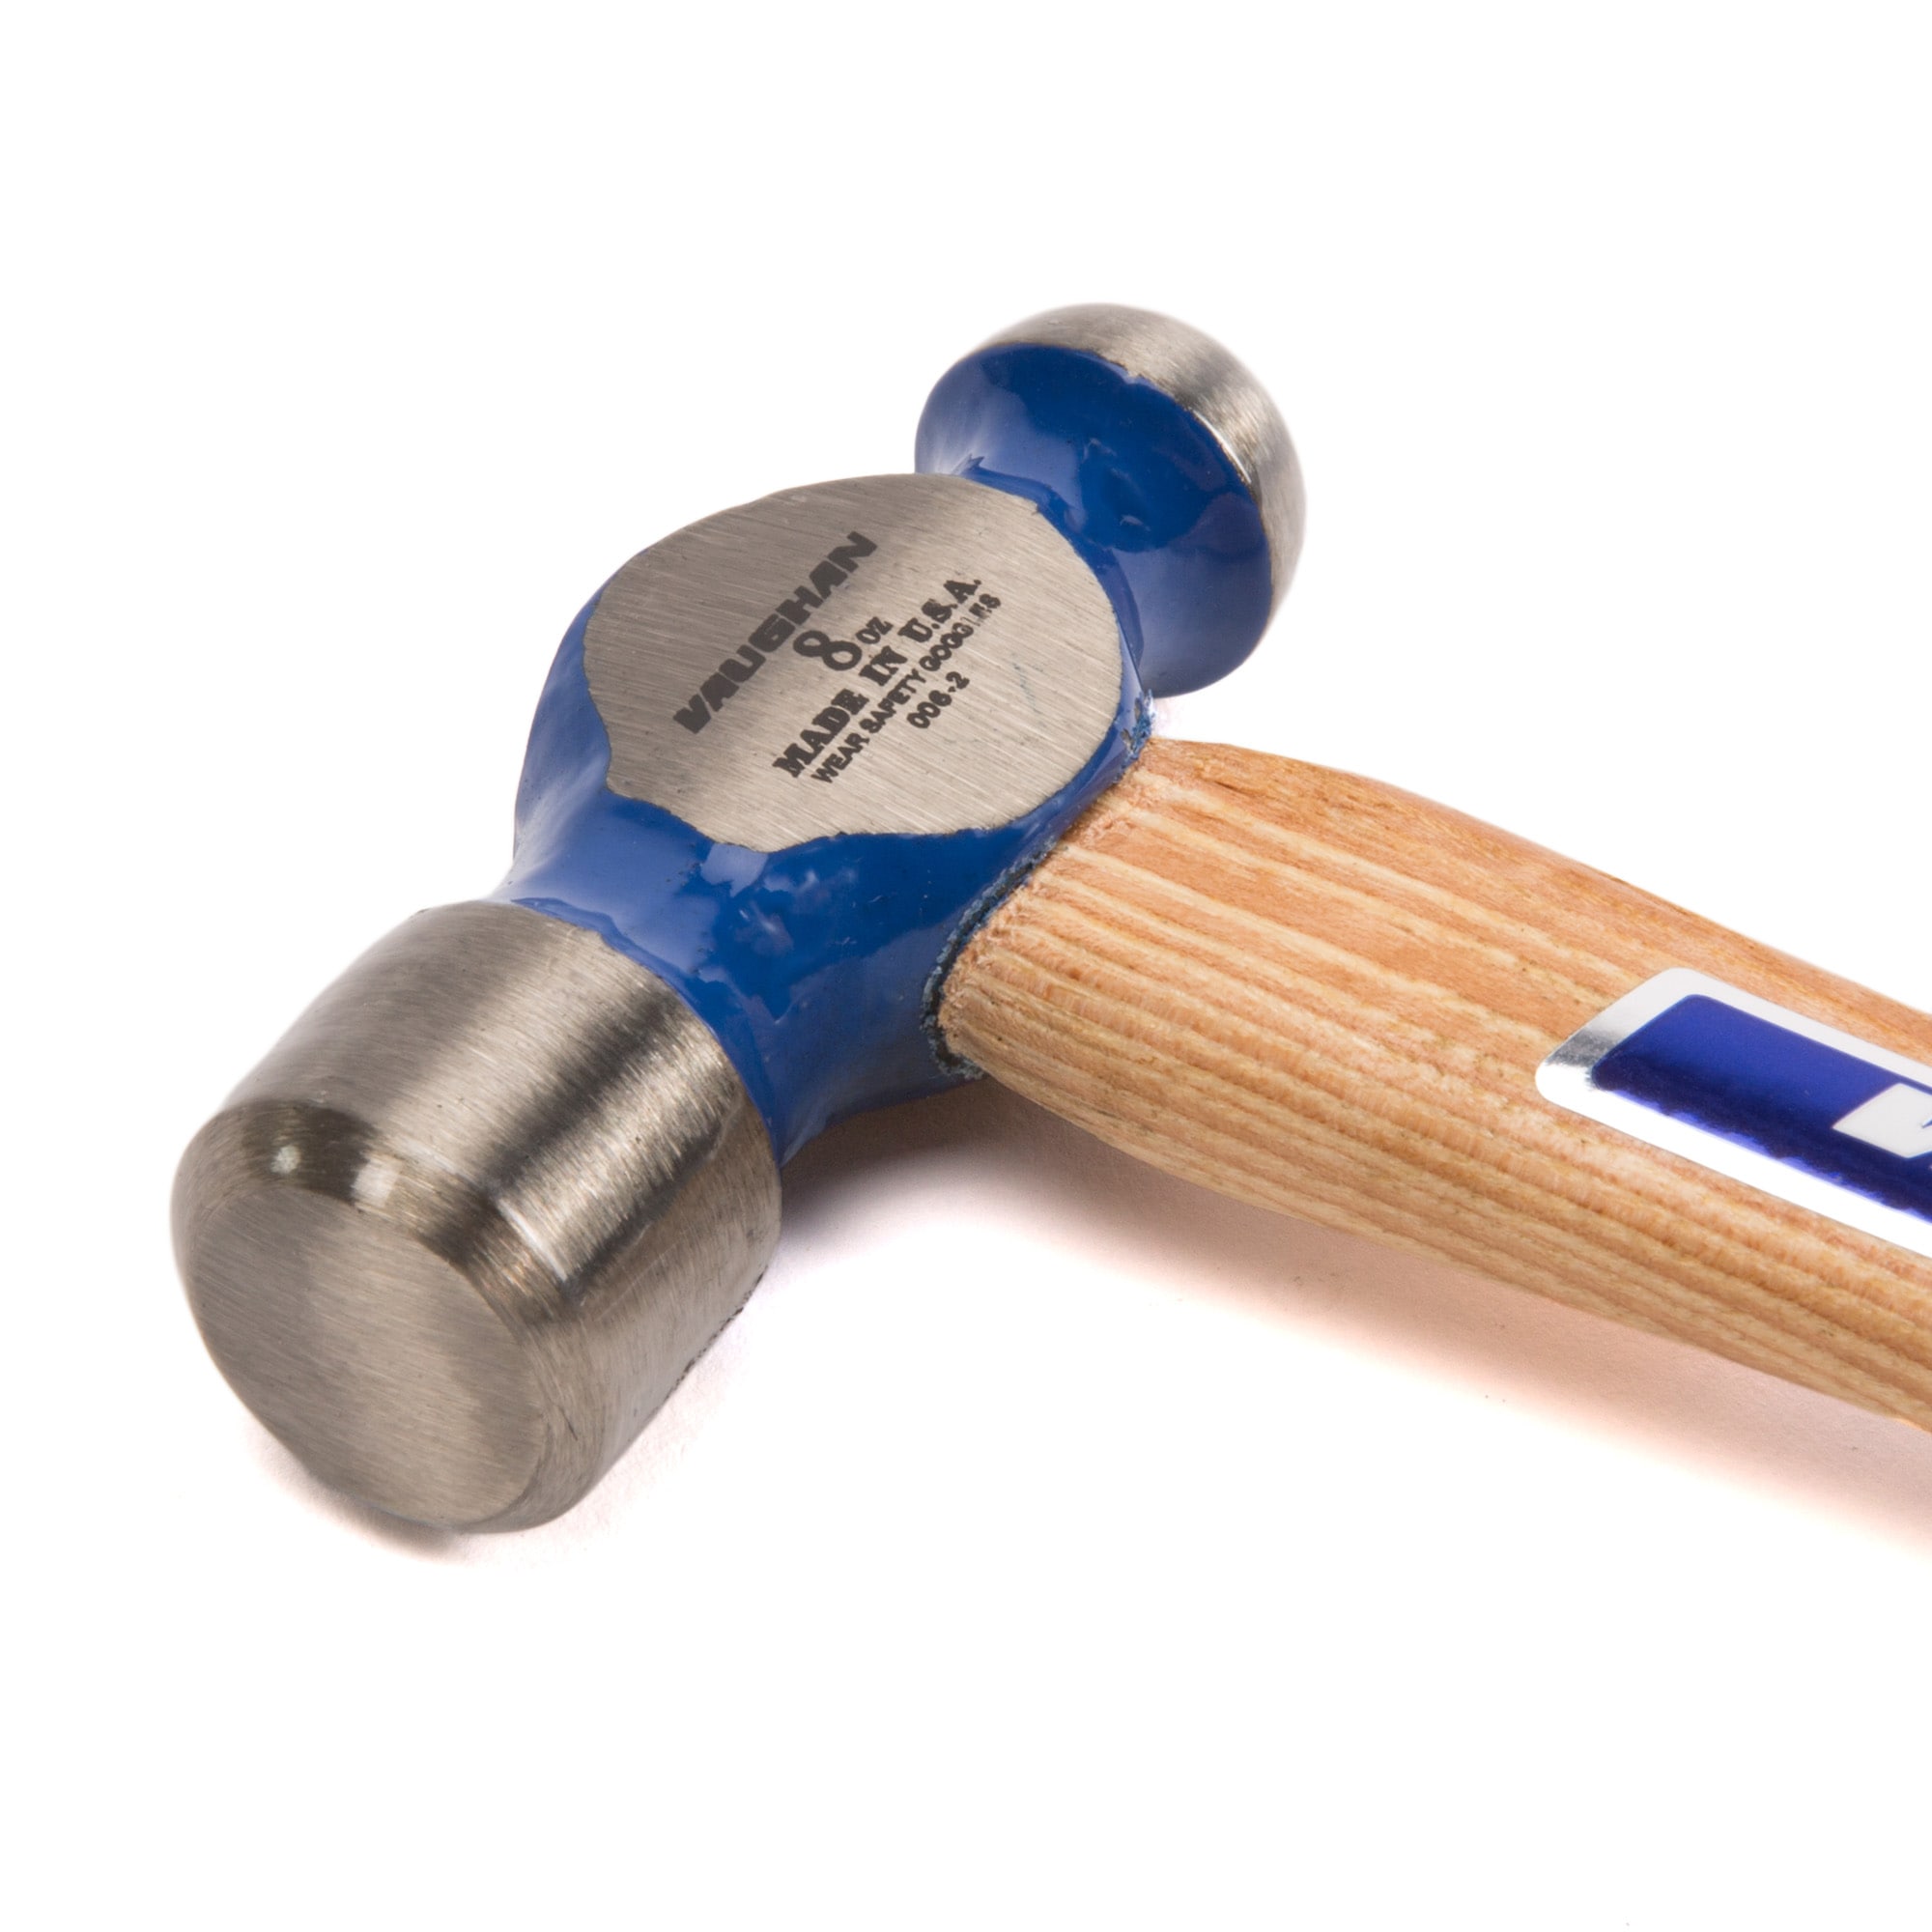 Details about   Solid Steel Ball-Peen Hammer with Nylon-vinyl Grip Double Tempered Head 8 oz 